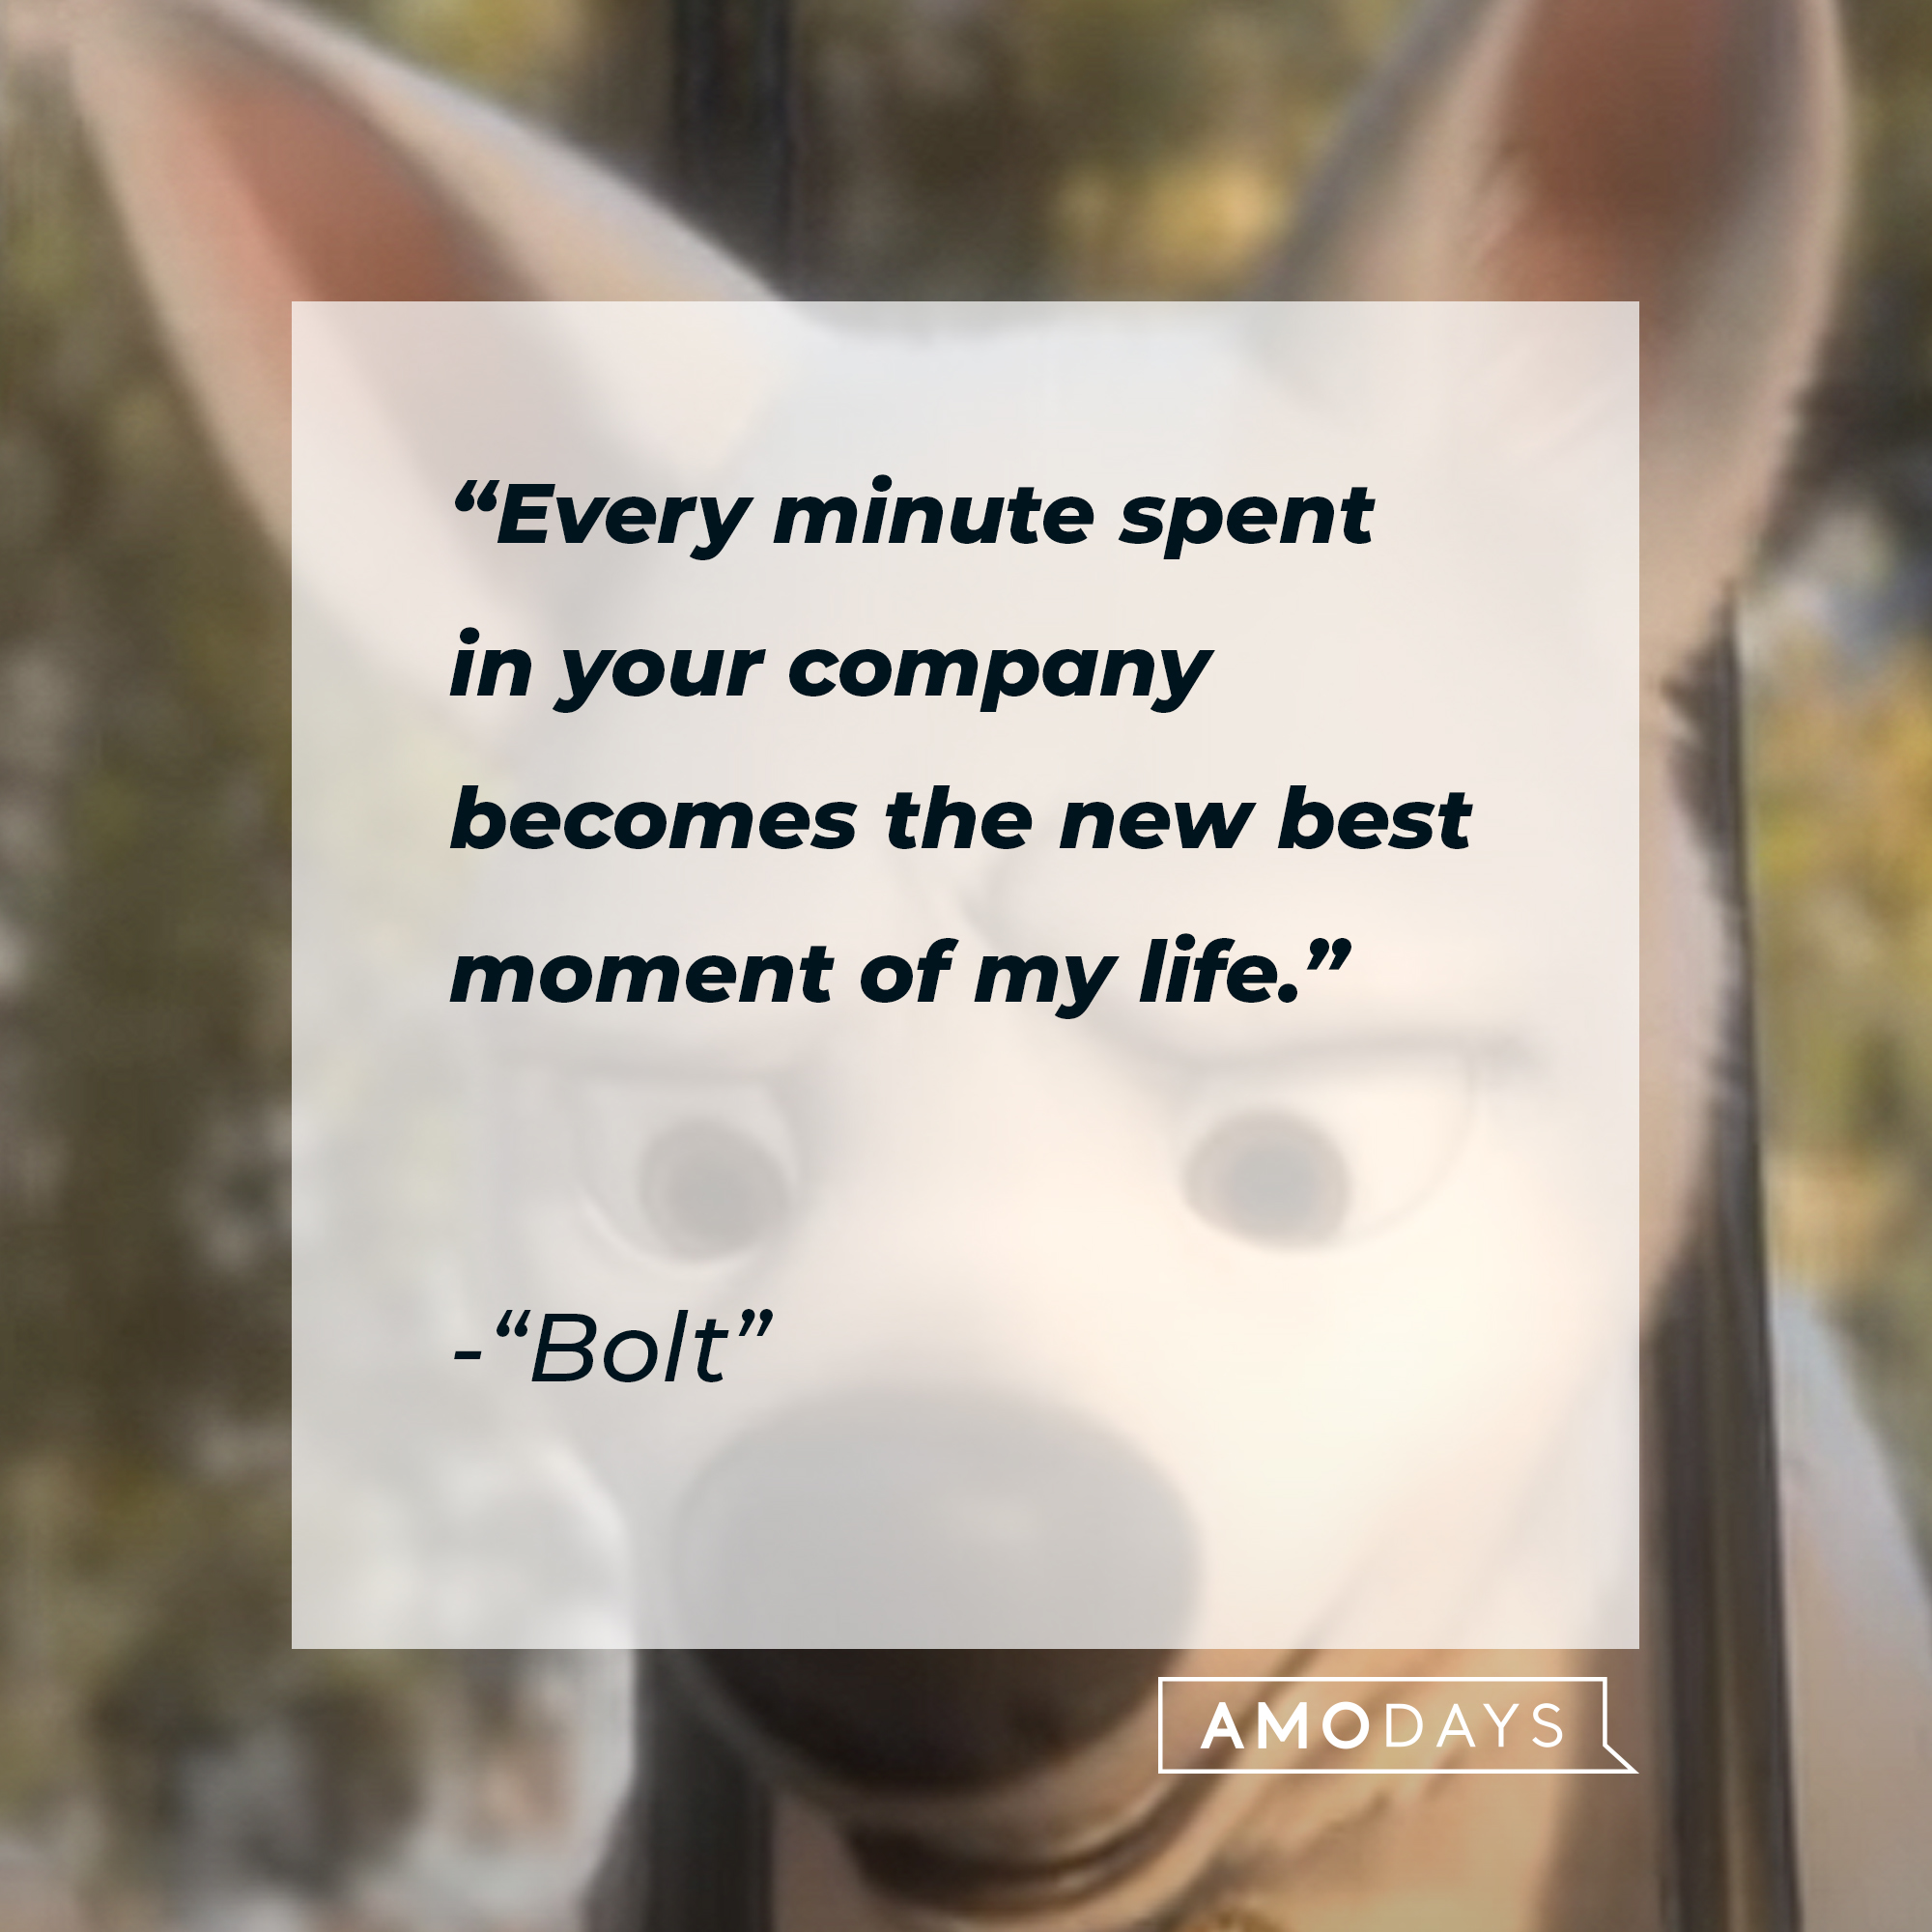 "Bolt's" quote: "Every minute spent in your company becomes the new best moment of my life." | Source: Youtube.com/DisneyUK